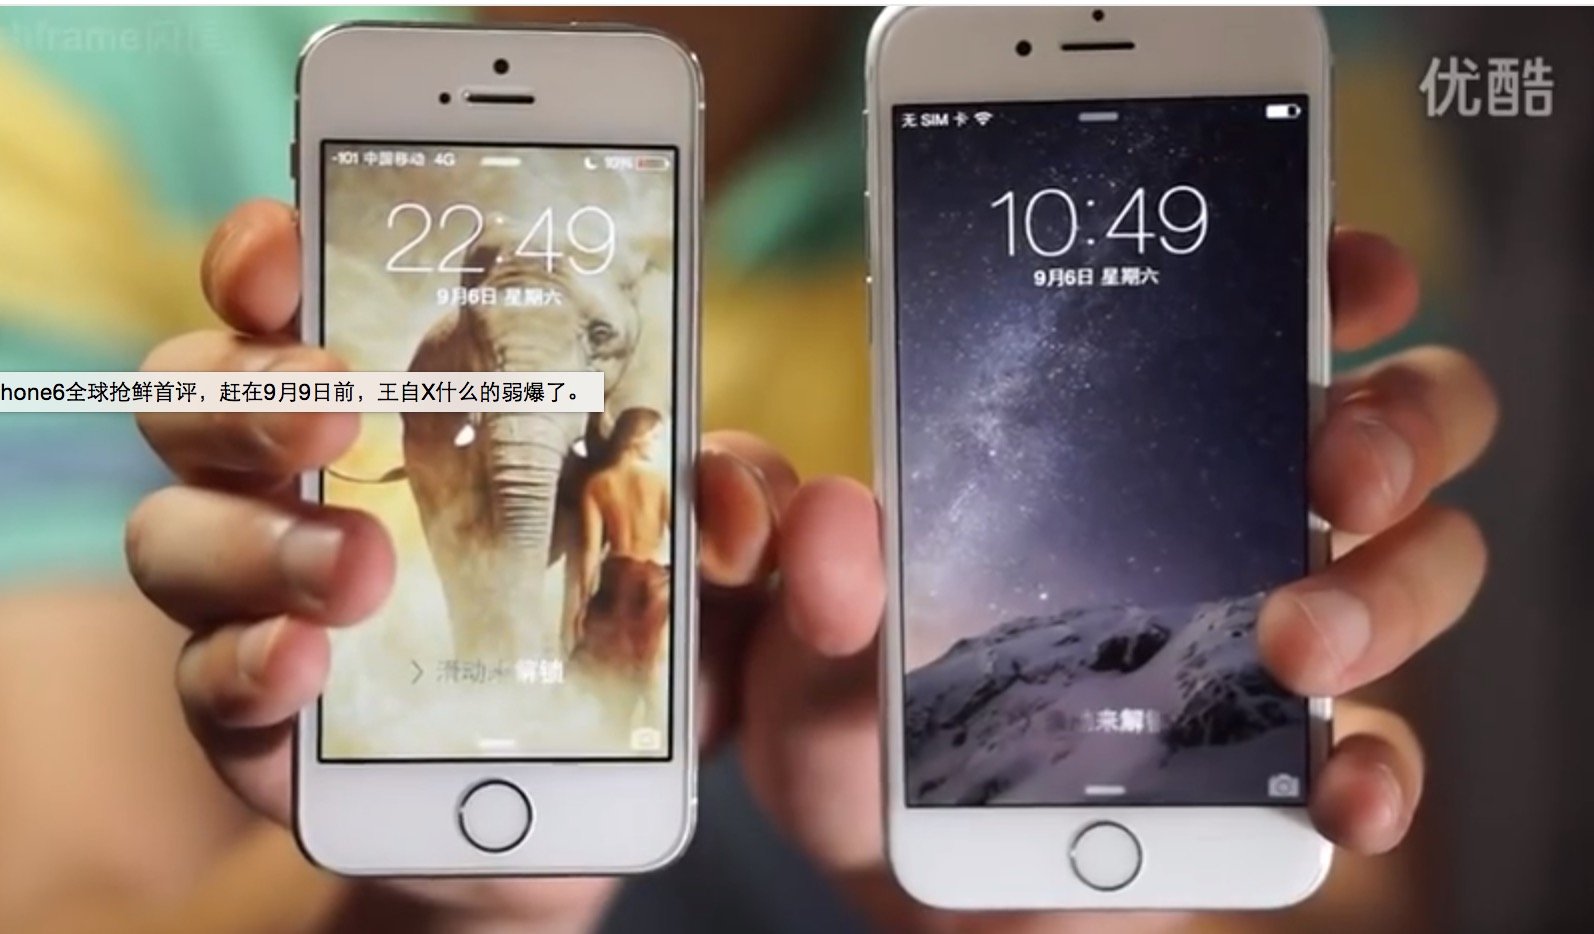 These videos show a very convincing iPhone 6 vs iPhone 5s comparison and early review.